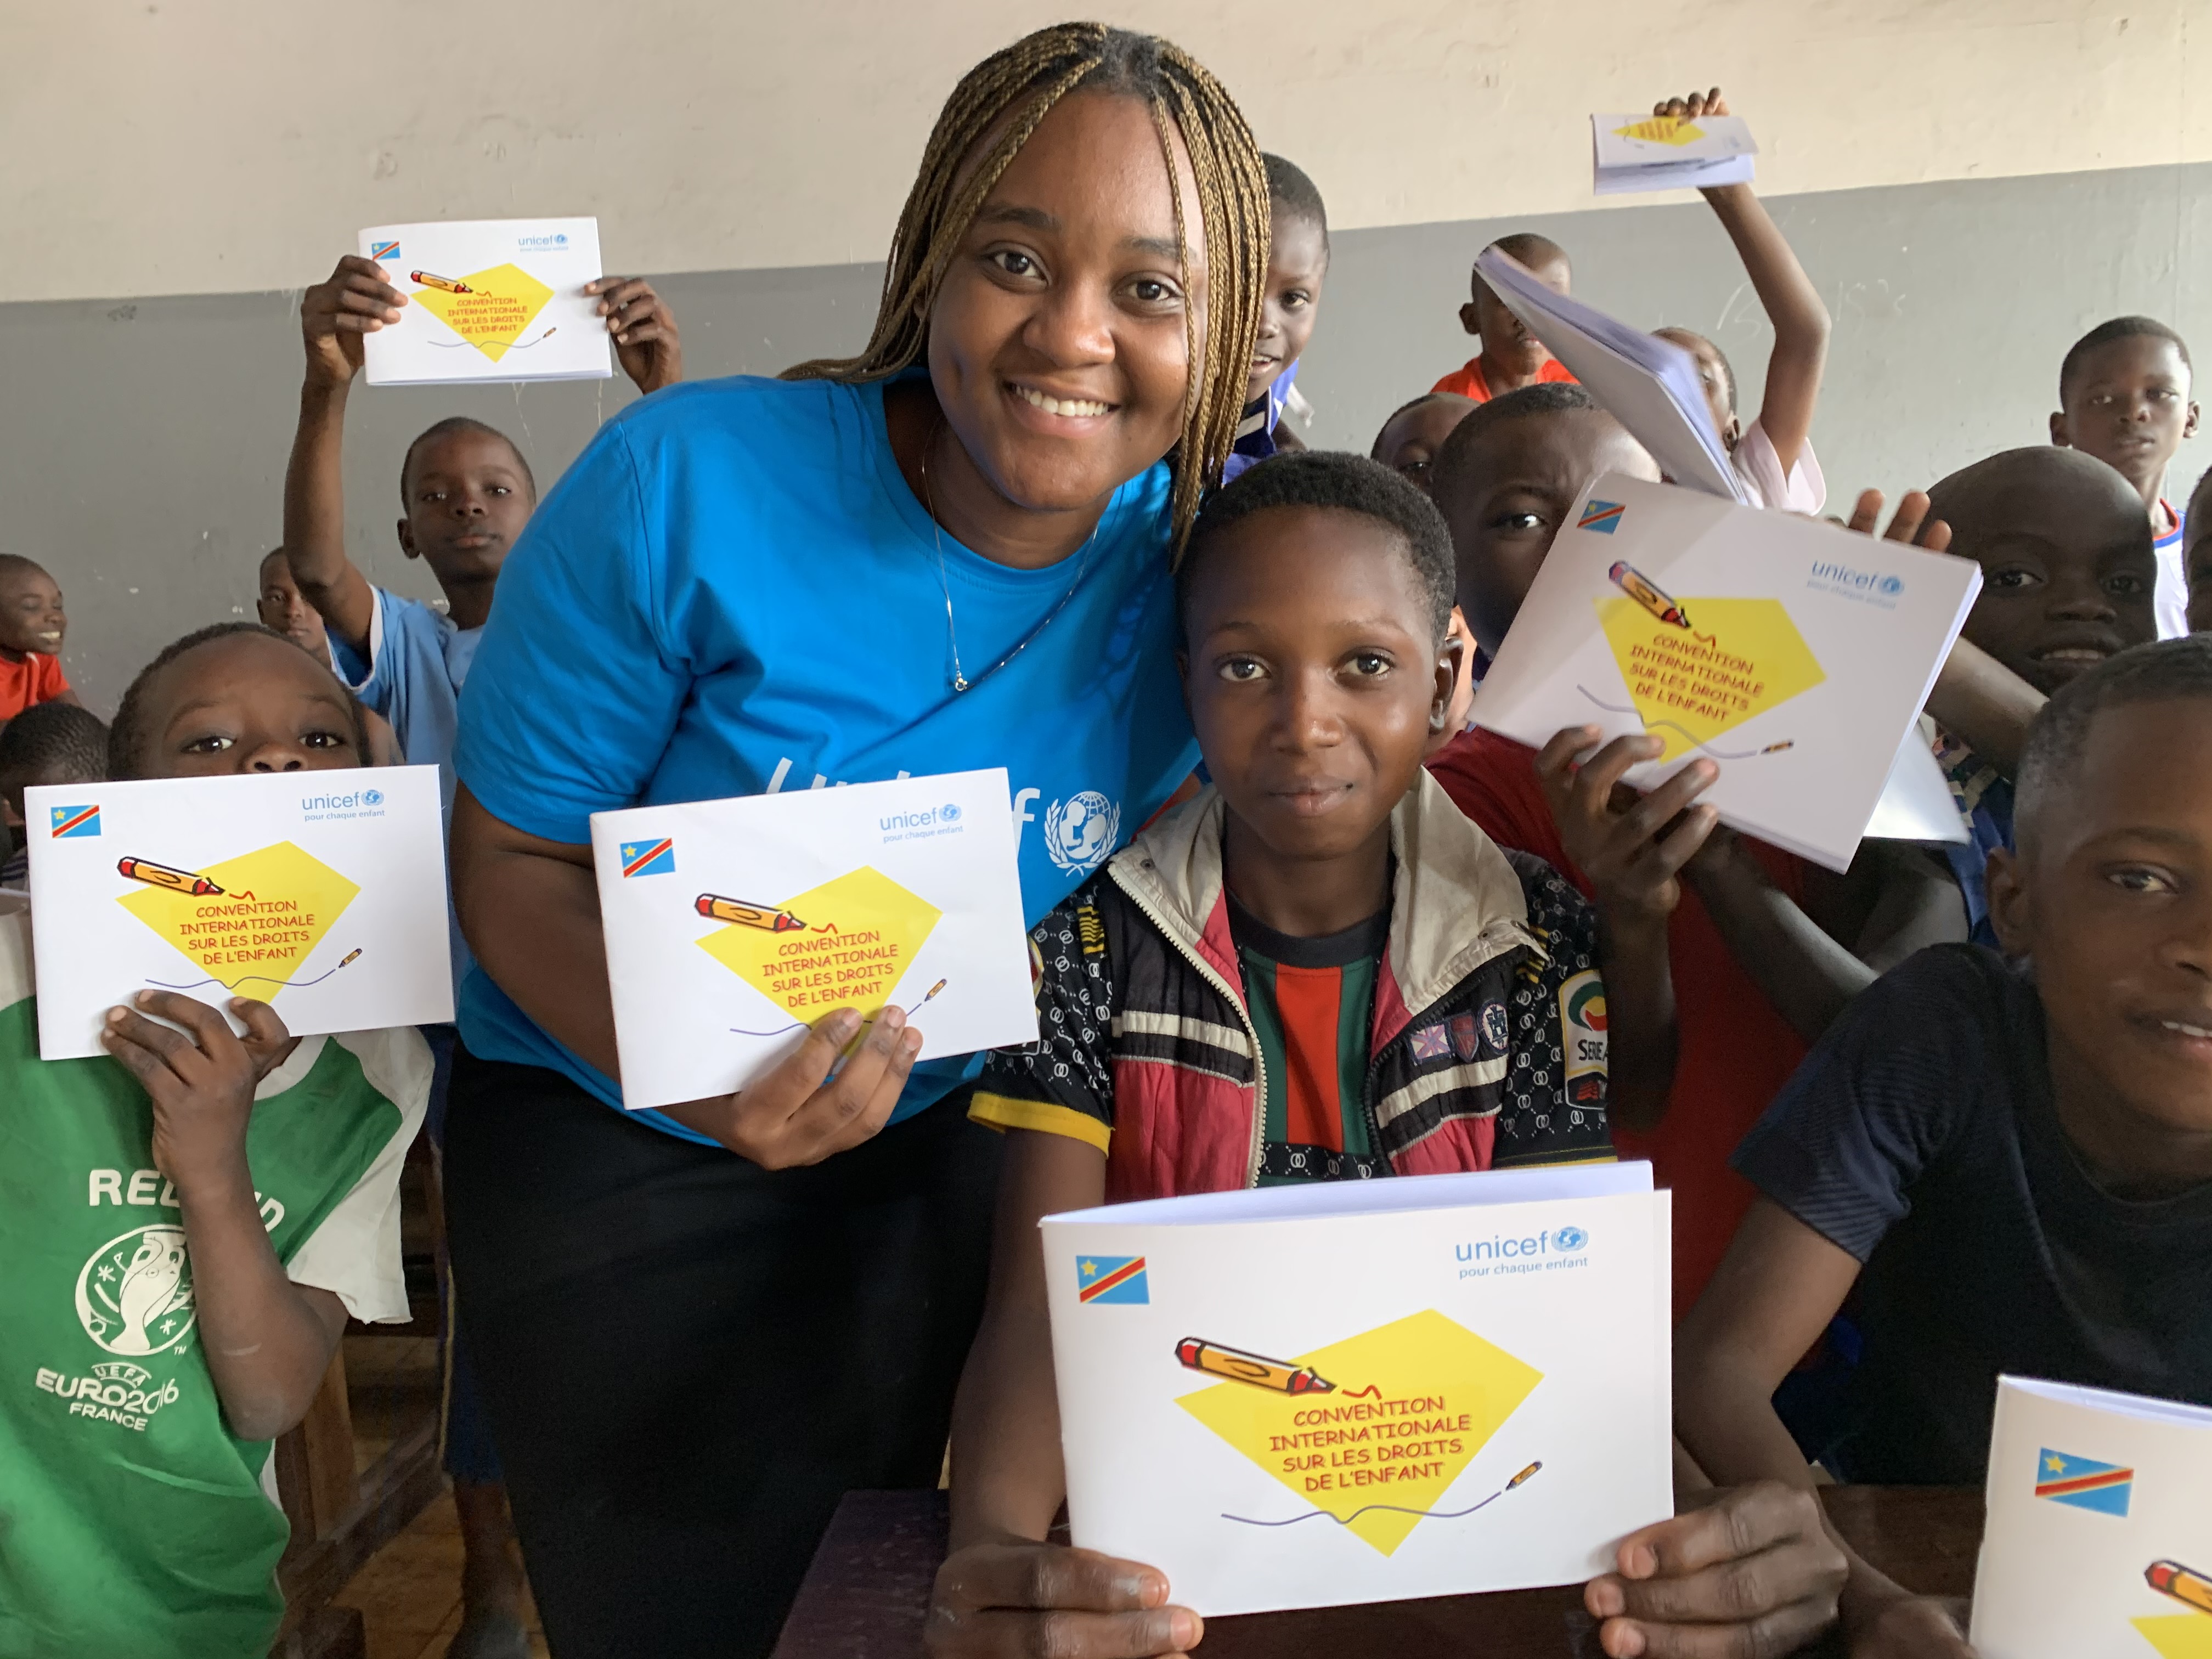 UNICEF trained 450 vulnerable children in Kinshasa between the ages of 10 and 17 on child rights, advocacy techniques and participation.